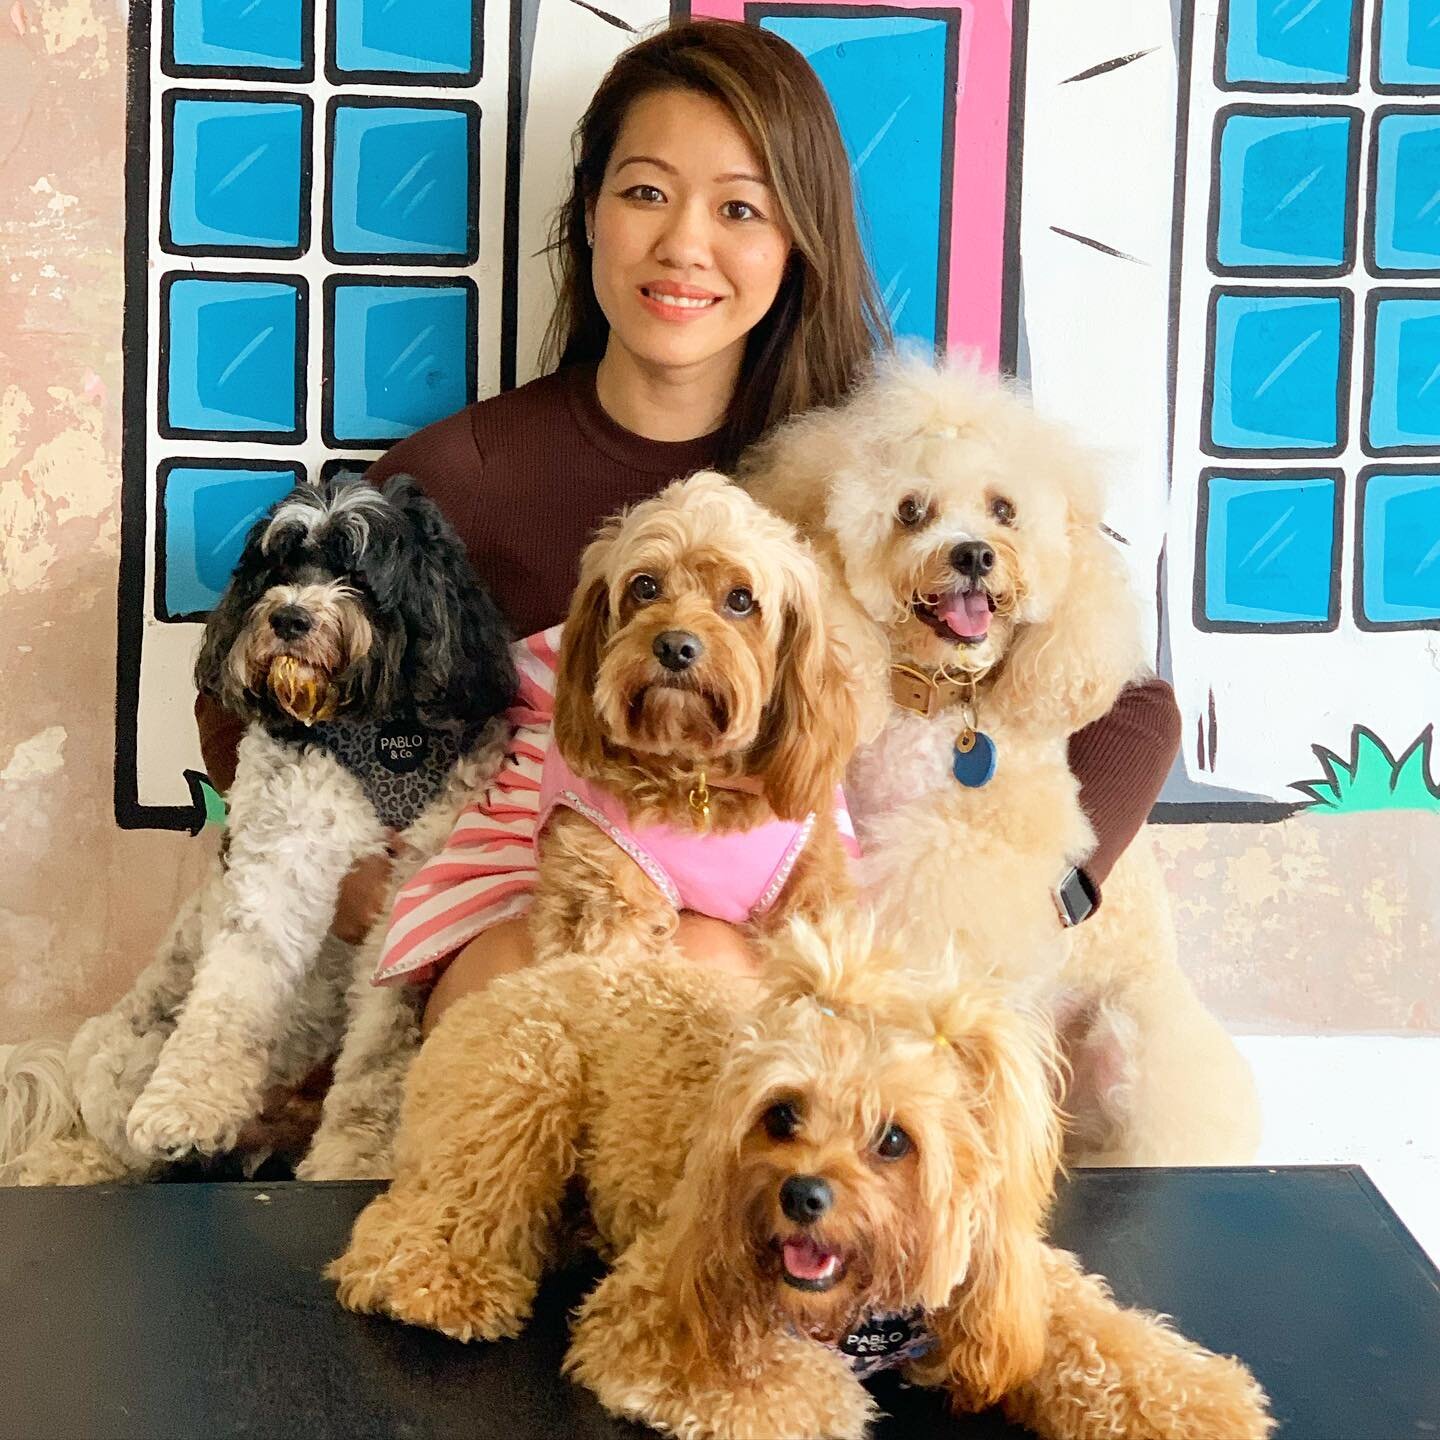 Loved dropping into Sydney&rsquo;s dog barkery @woofgateaux with our good fur friends @willow.wonder.dog and @oscarmax.rubymae. Thank you Jason for treating the pups to puppuccinos, so delicious that they saved you from washing any dishes 😂🤣😂